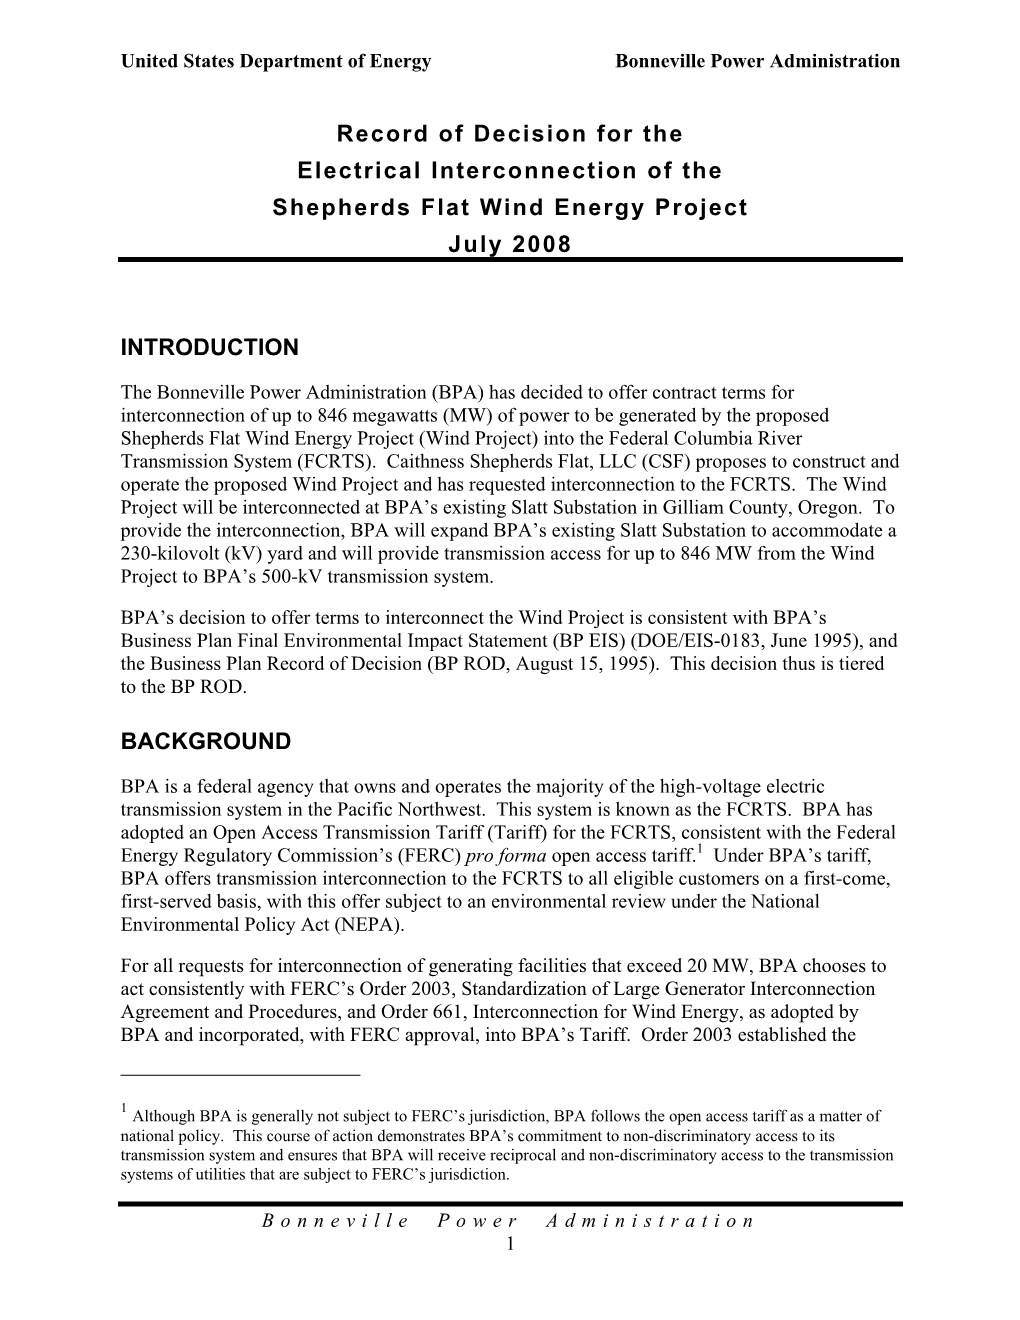 Record of Decision for the Electrical Interconnection of the Shepherds Flat Wind Energy Project July 2008